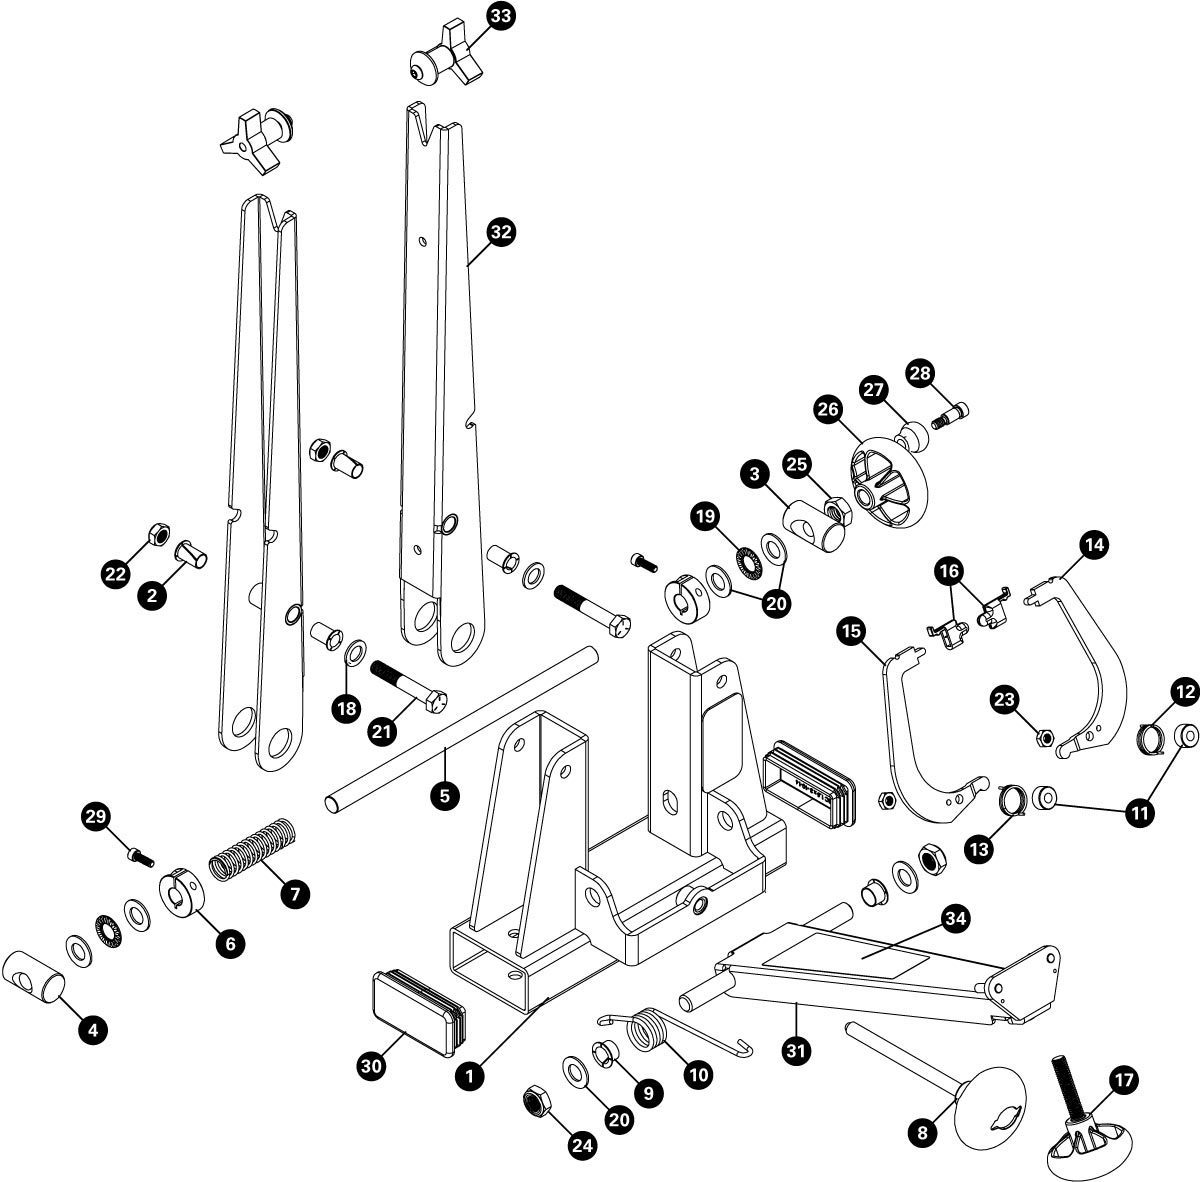 Parts diagram for TS-2.3 Professional Wheel Truing Stand, enlarged